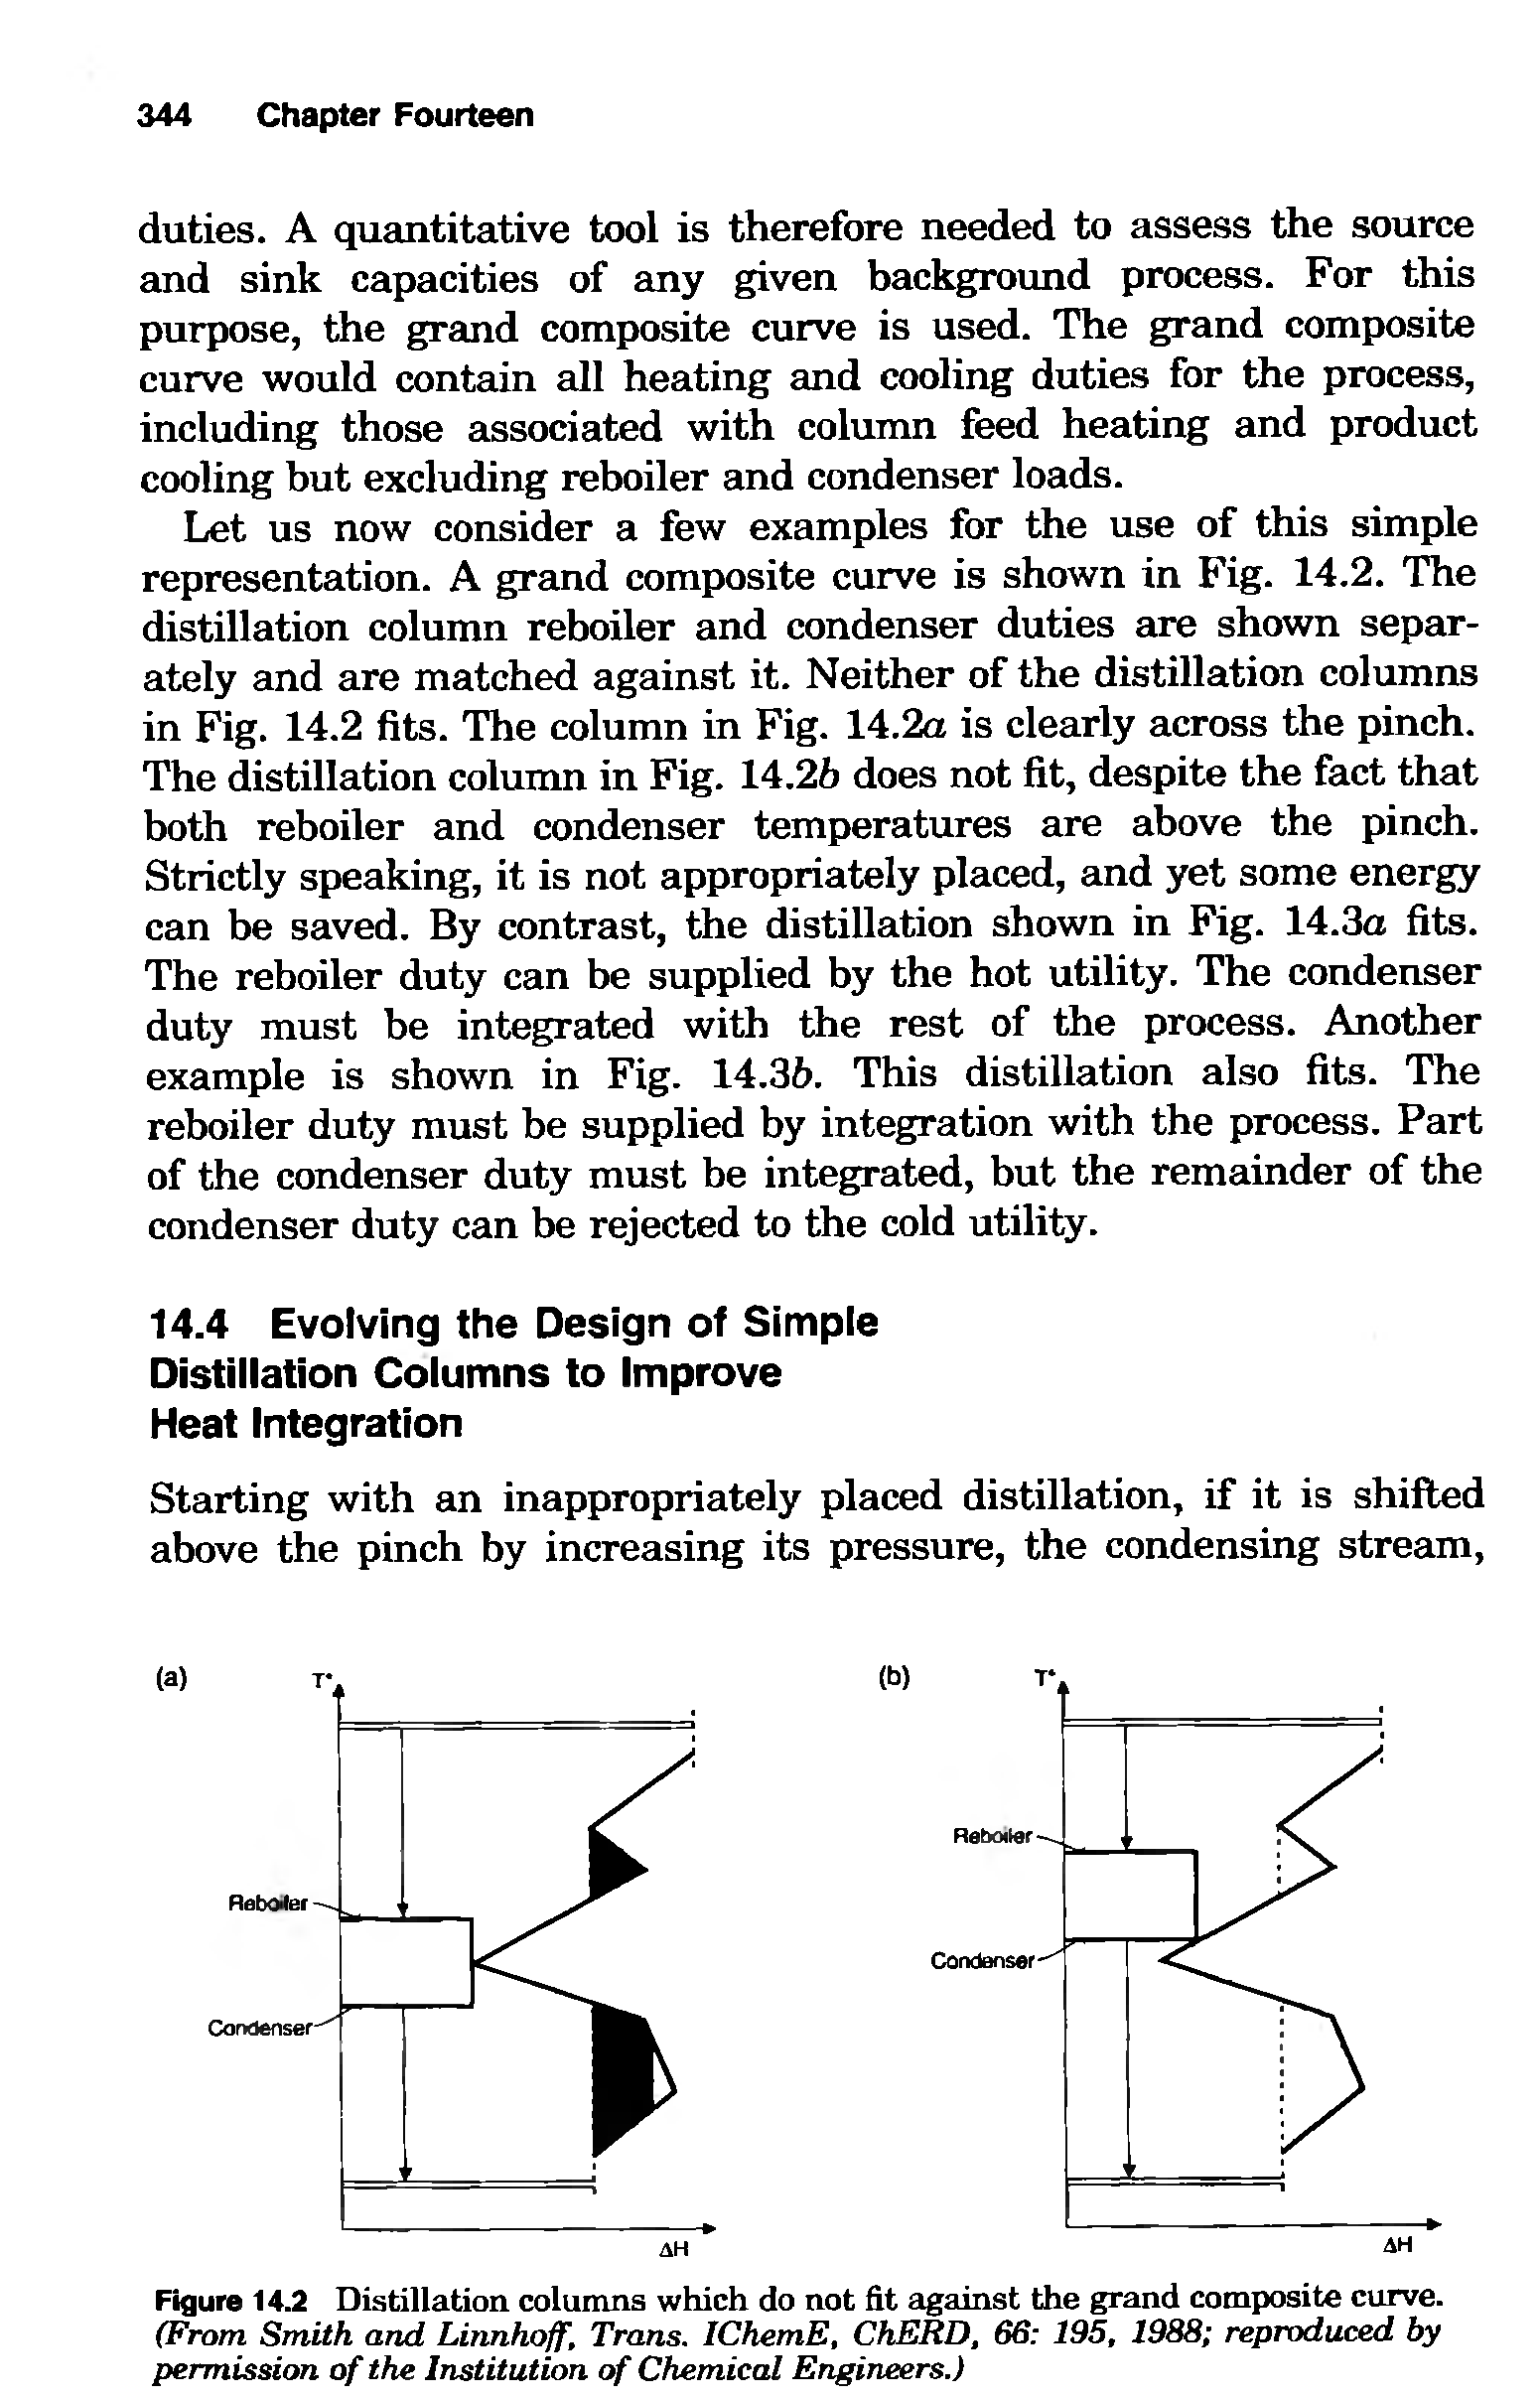 Figure 14.2 Distillation columns which do not fit against the grand composite curve. (From Smith and Linnhoff, Trans. IChemE, ChERD, 66 195, 1988 reproduced by permission of the Institution of Chemical Engineers.)...